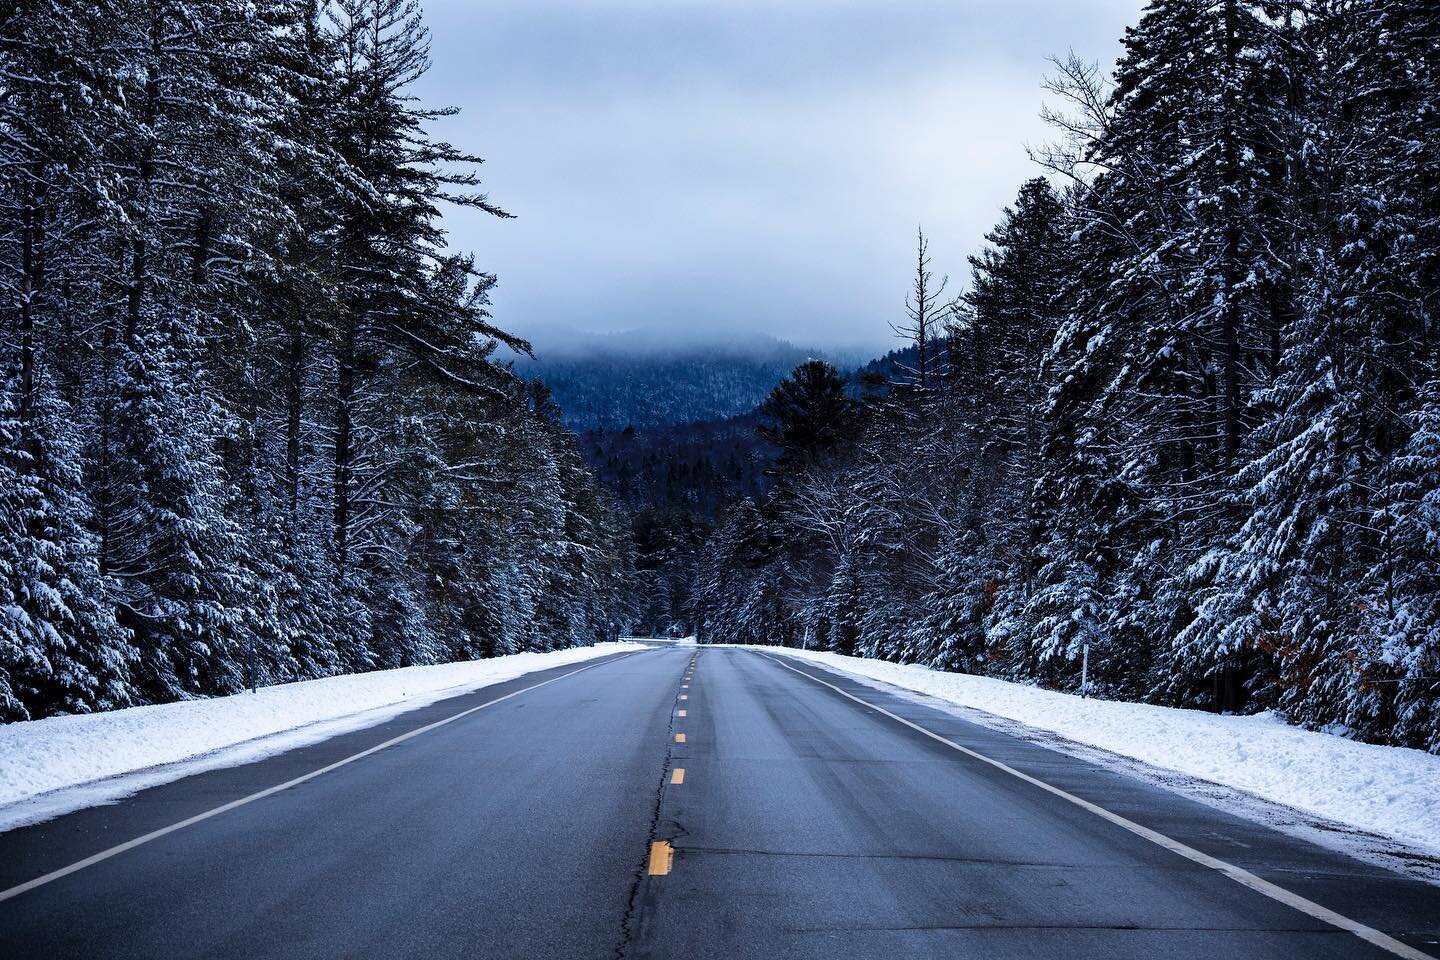 Sometimes You Have To Stop and Take a Photo
01.03.2021
Route 112
New Hampshire 

#mountains #explore #photography #travel #fog #scenic #winter #newhampshire #kancamagus #highway #nh #January2021 #nature #forest #adventure #mysterious #roads #street #